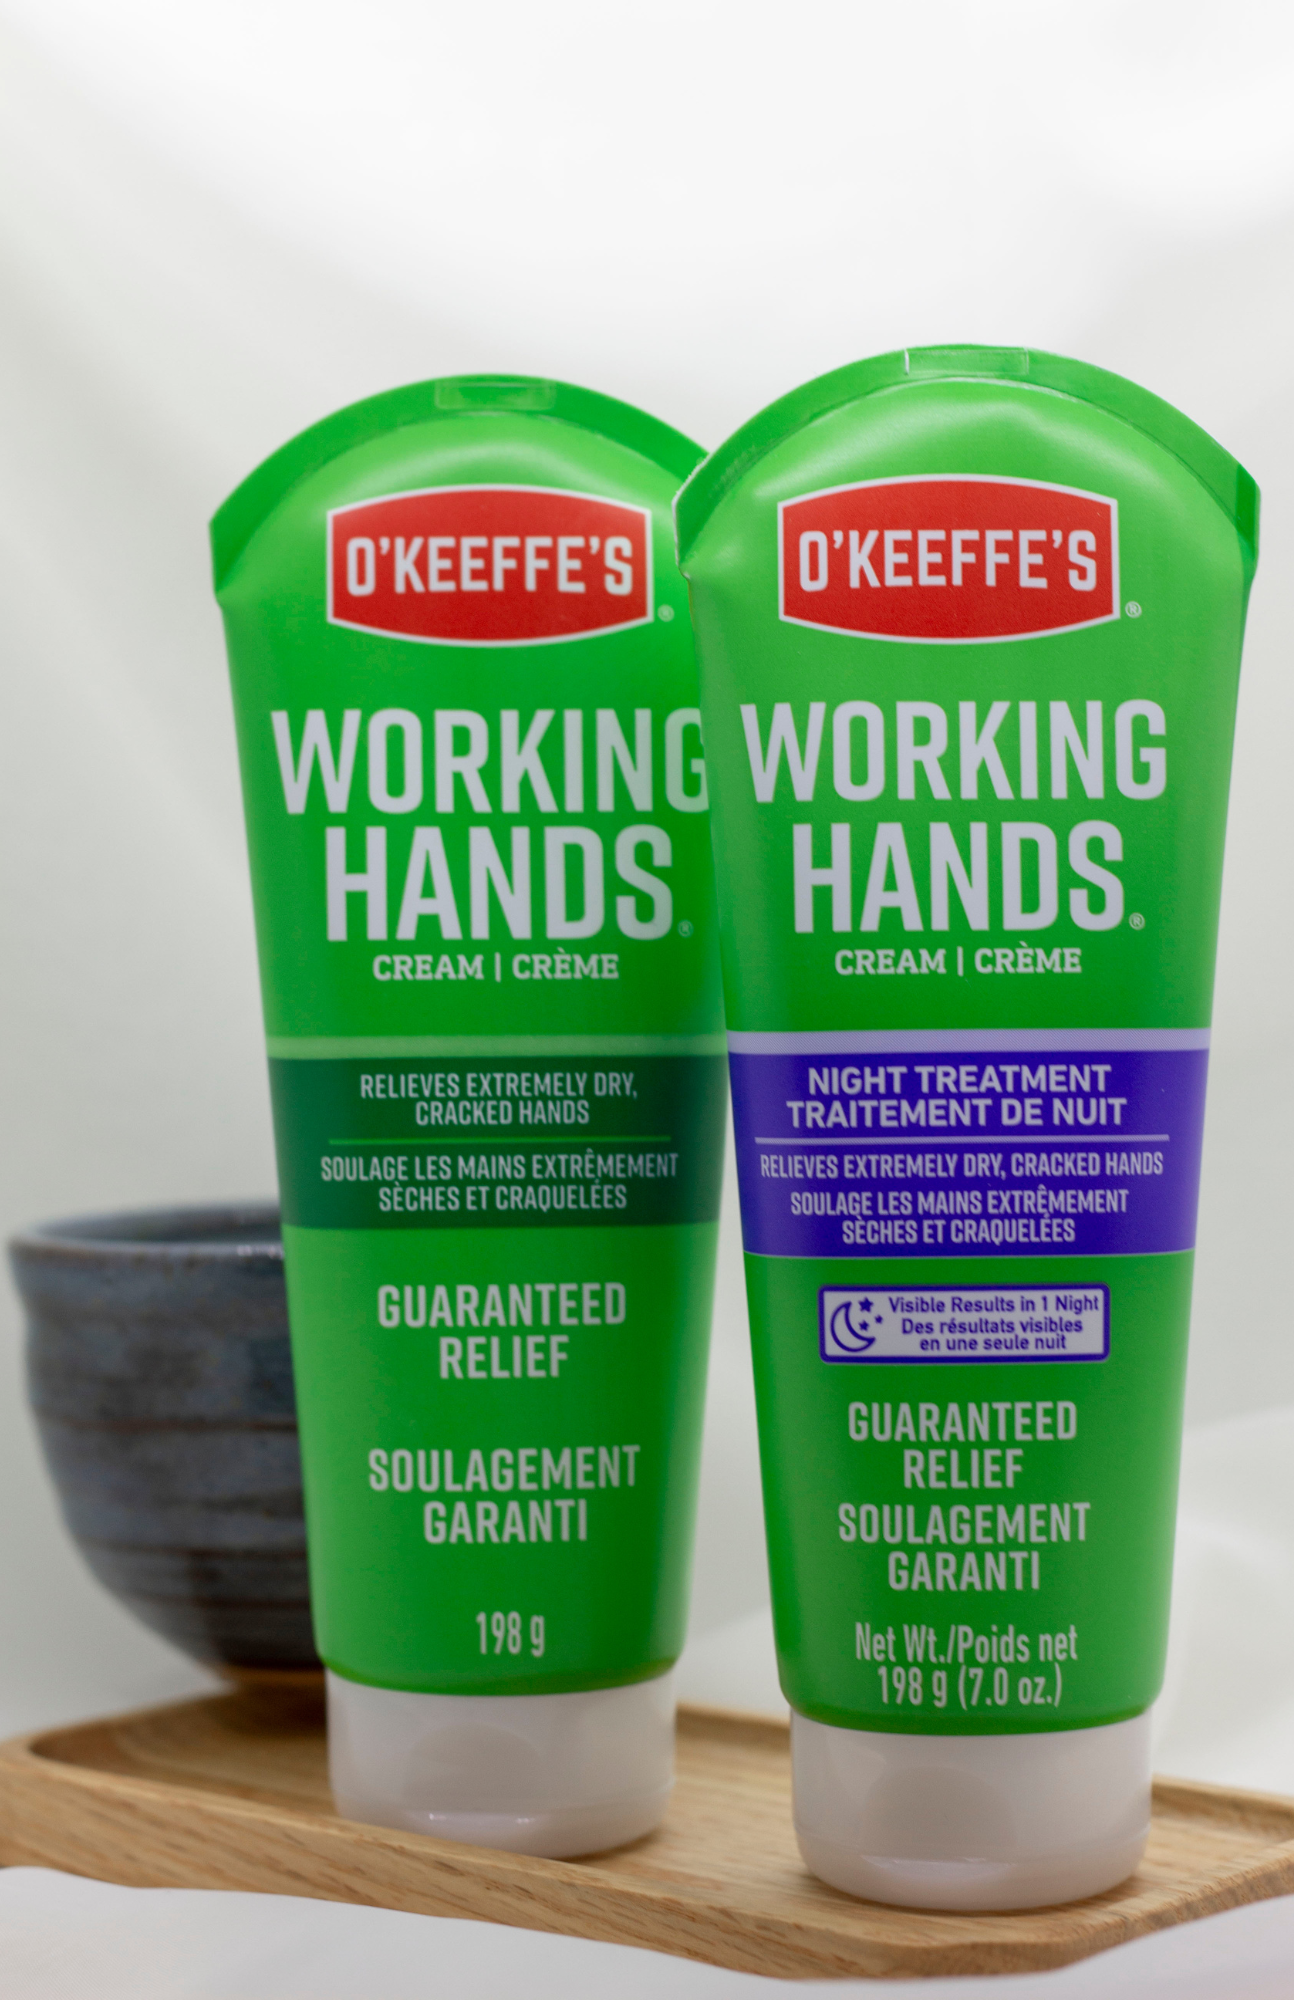 Two bottles of O'Keeffe's Working Hands Hand Cream, showcasing the 'day' and 'night' treatment variations.